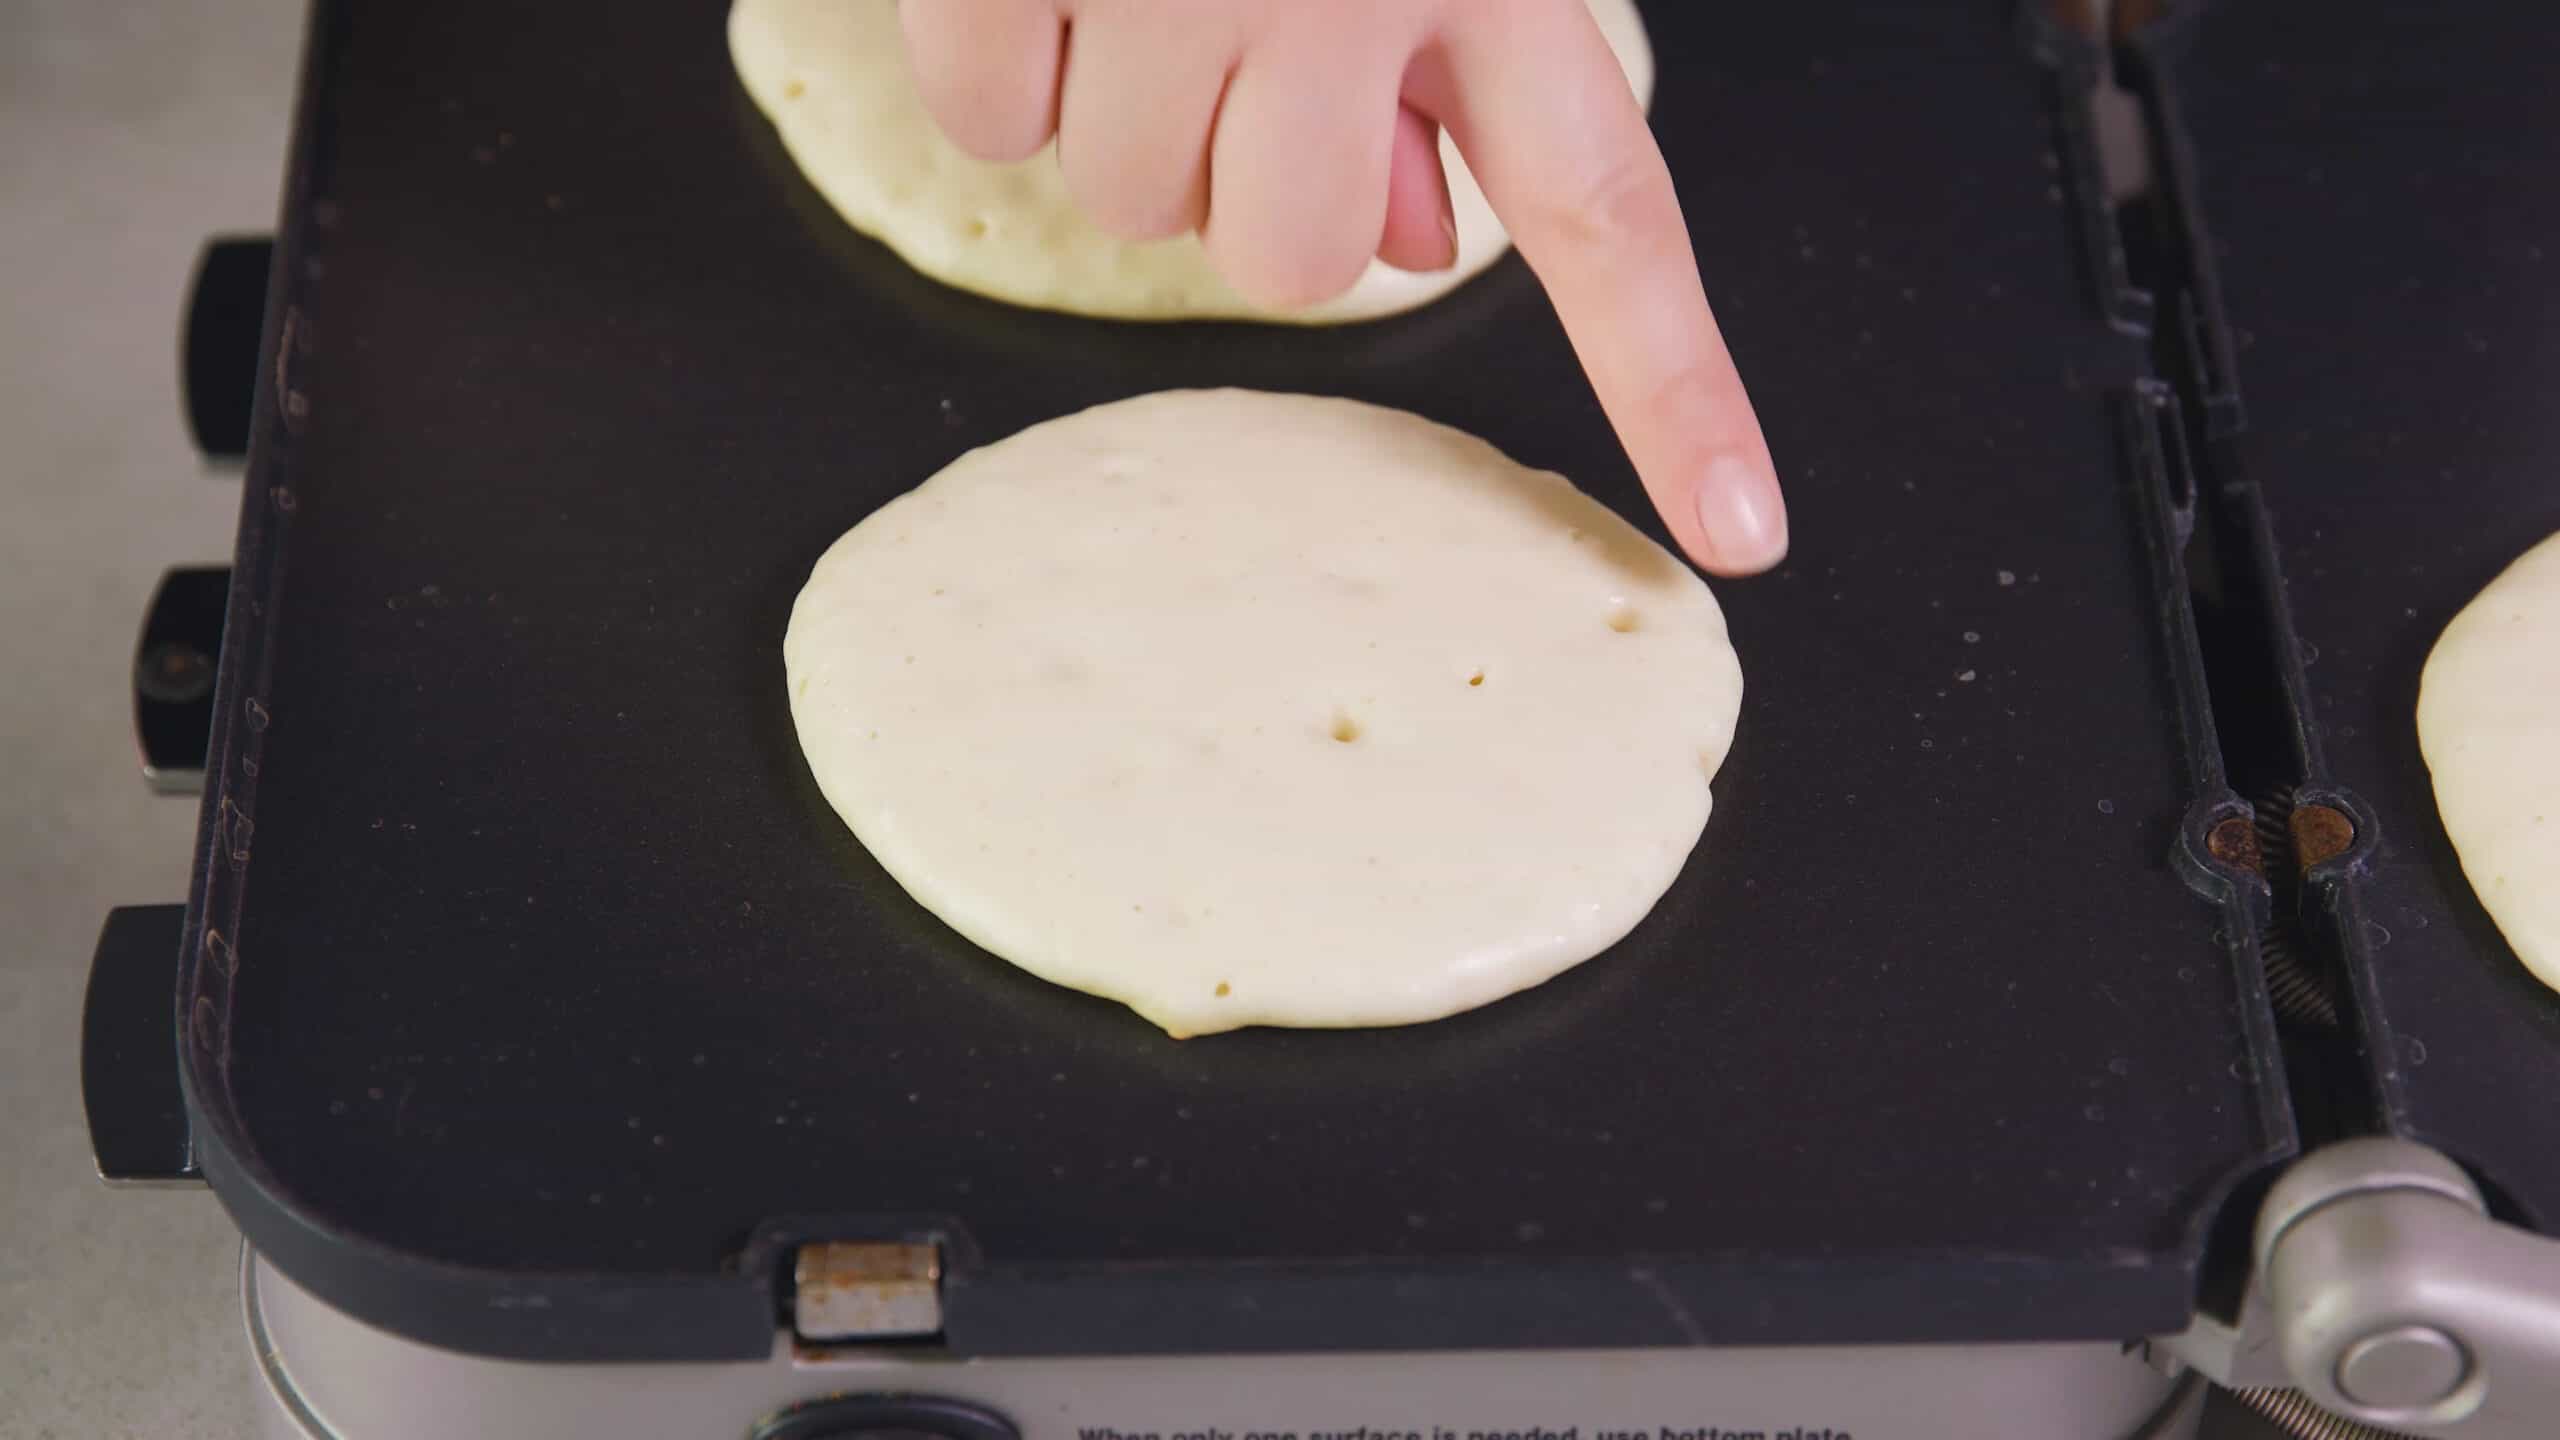 Angled view of non-stick griddle with a cooking pancake on top with the doughy side up and bubbles just beginning to form to show correct doneness.